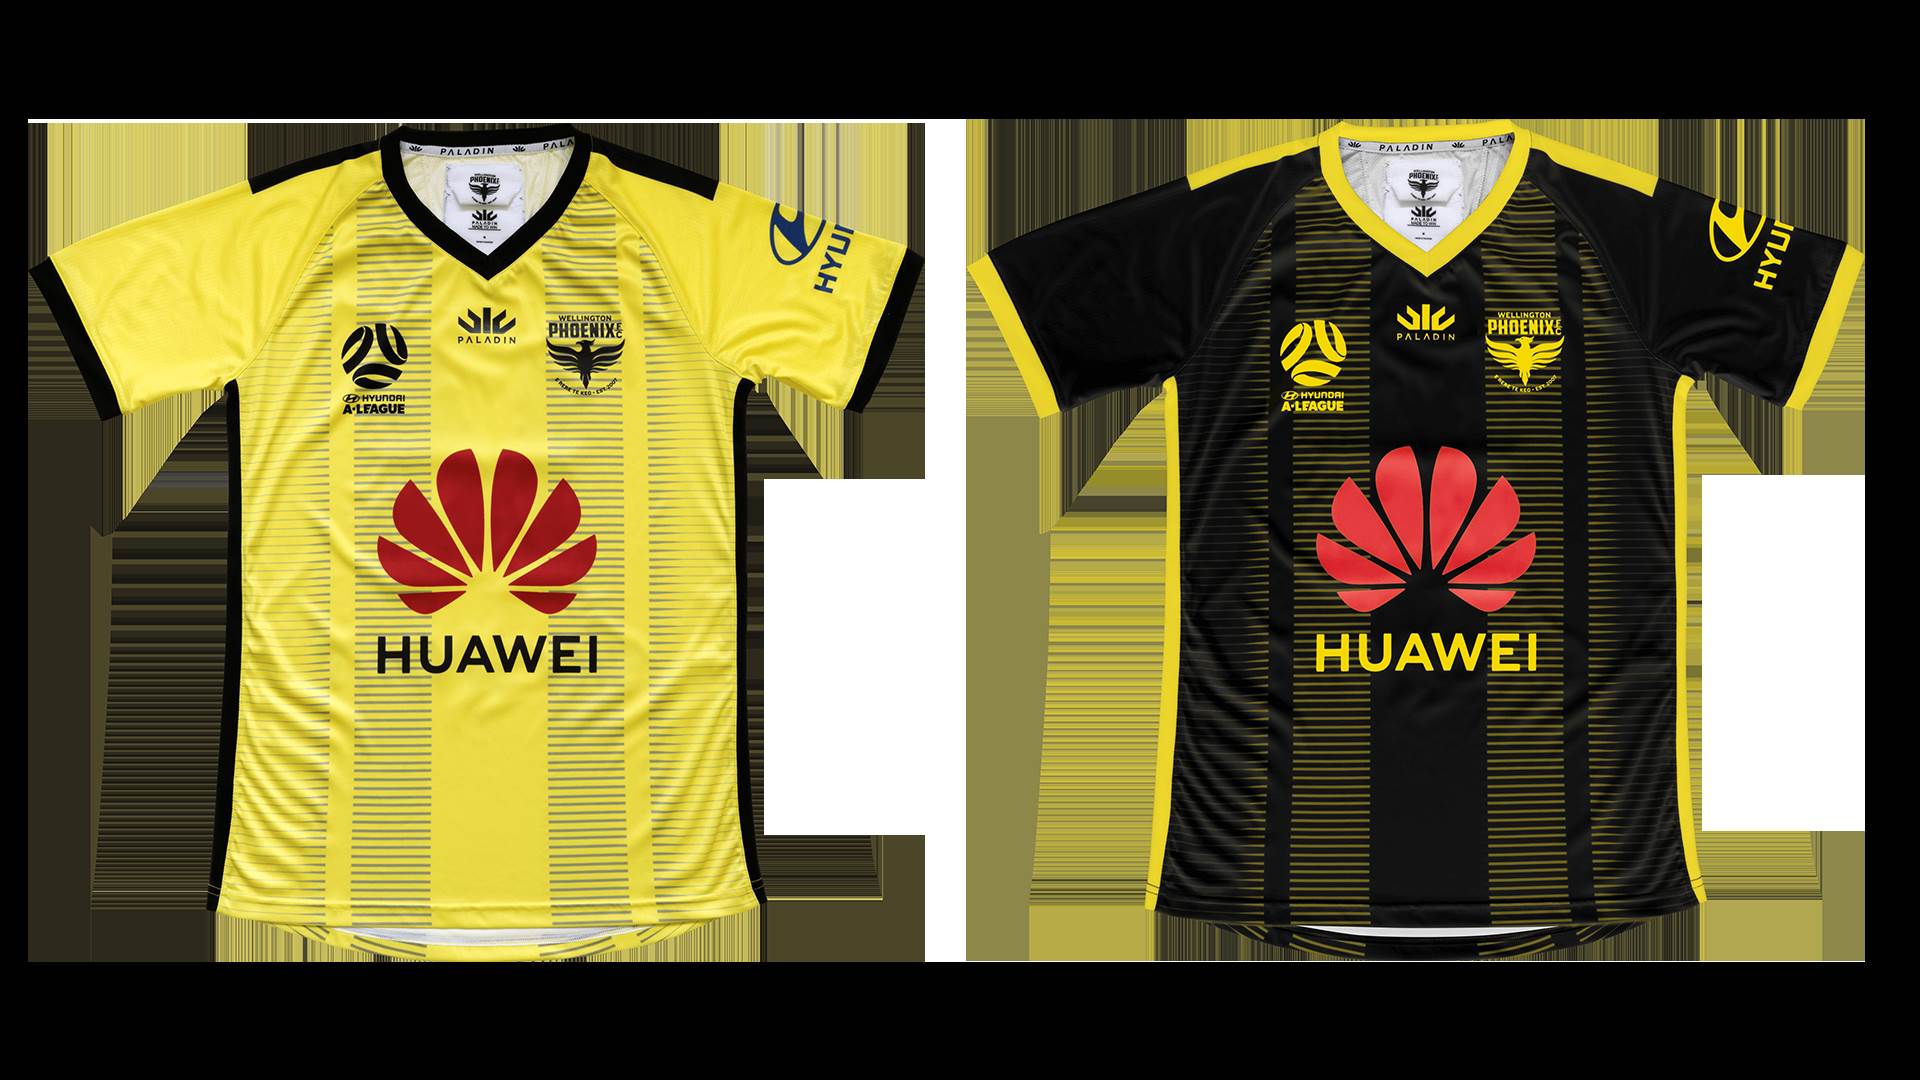 Wellington Phoenix unveil new shirts - FTBL | The home of football in